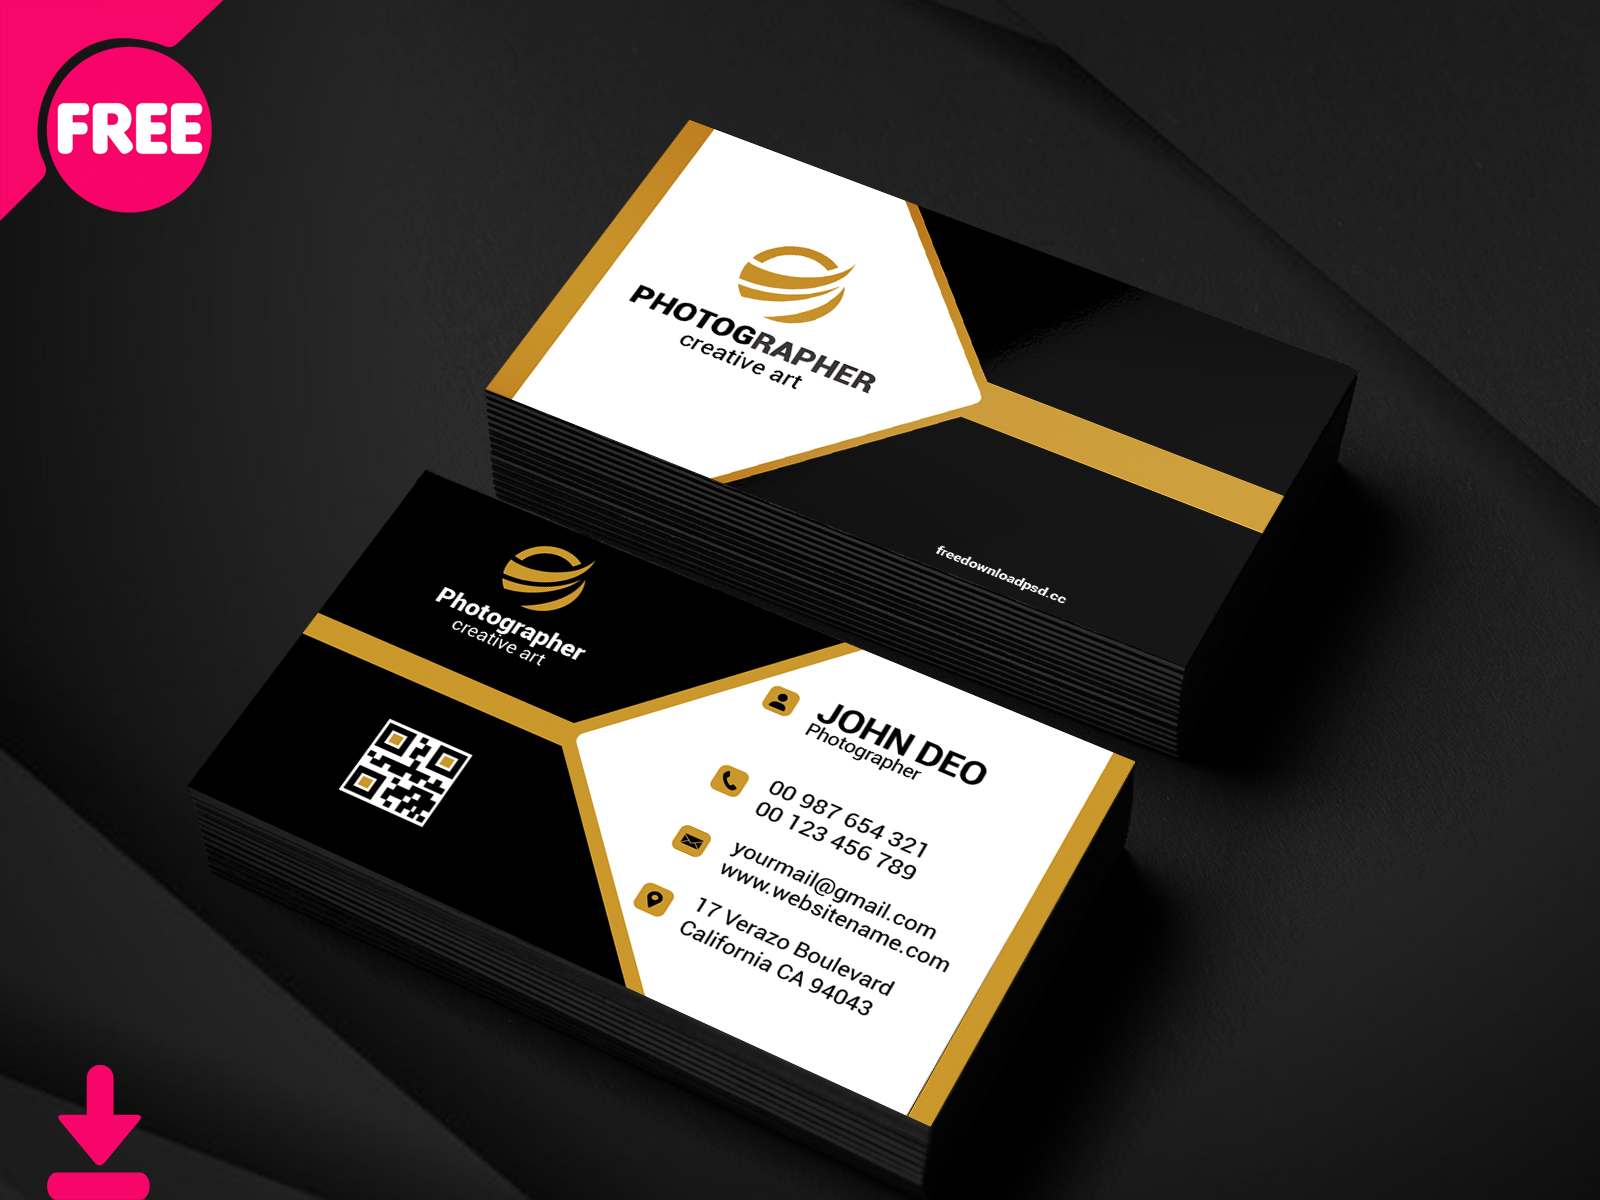 Free Sample Photography Business Card Psd Template Cover by Sheikh Regarding Photoshop Cs6 Business Card Template